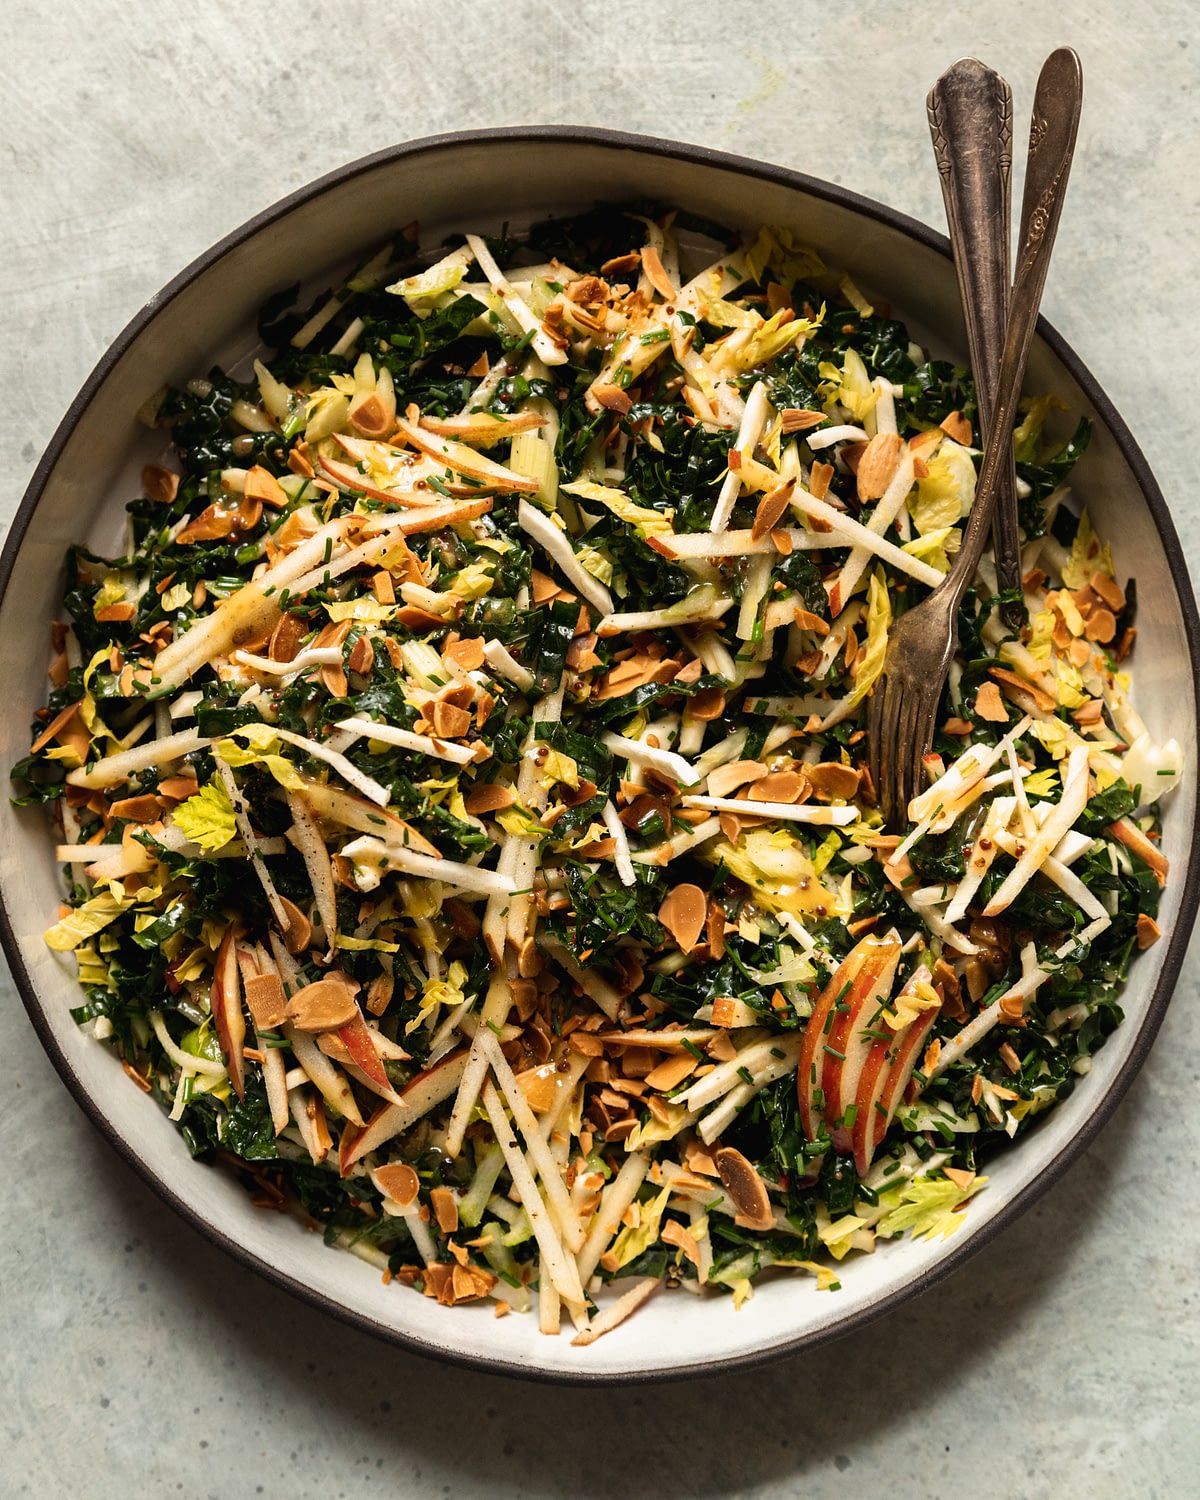 Apple Kale Salad with Miso Mustard Dressing